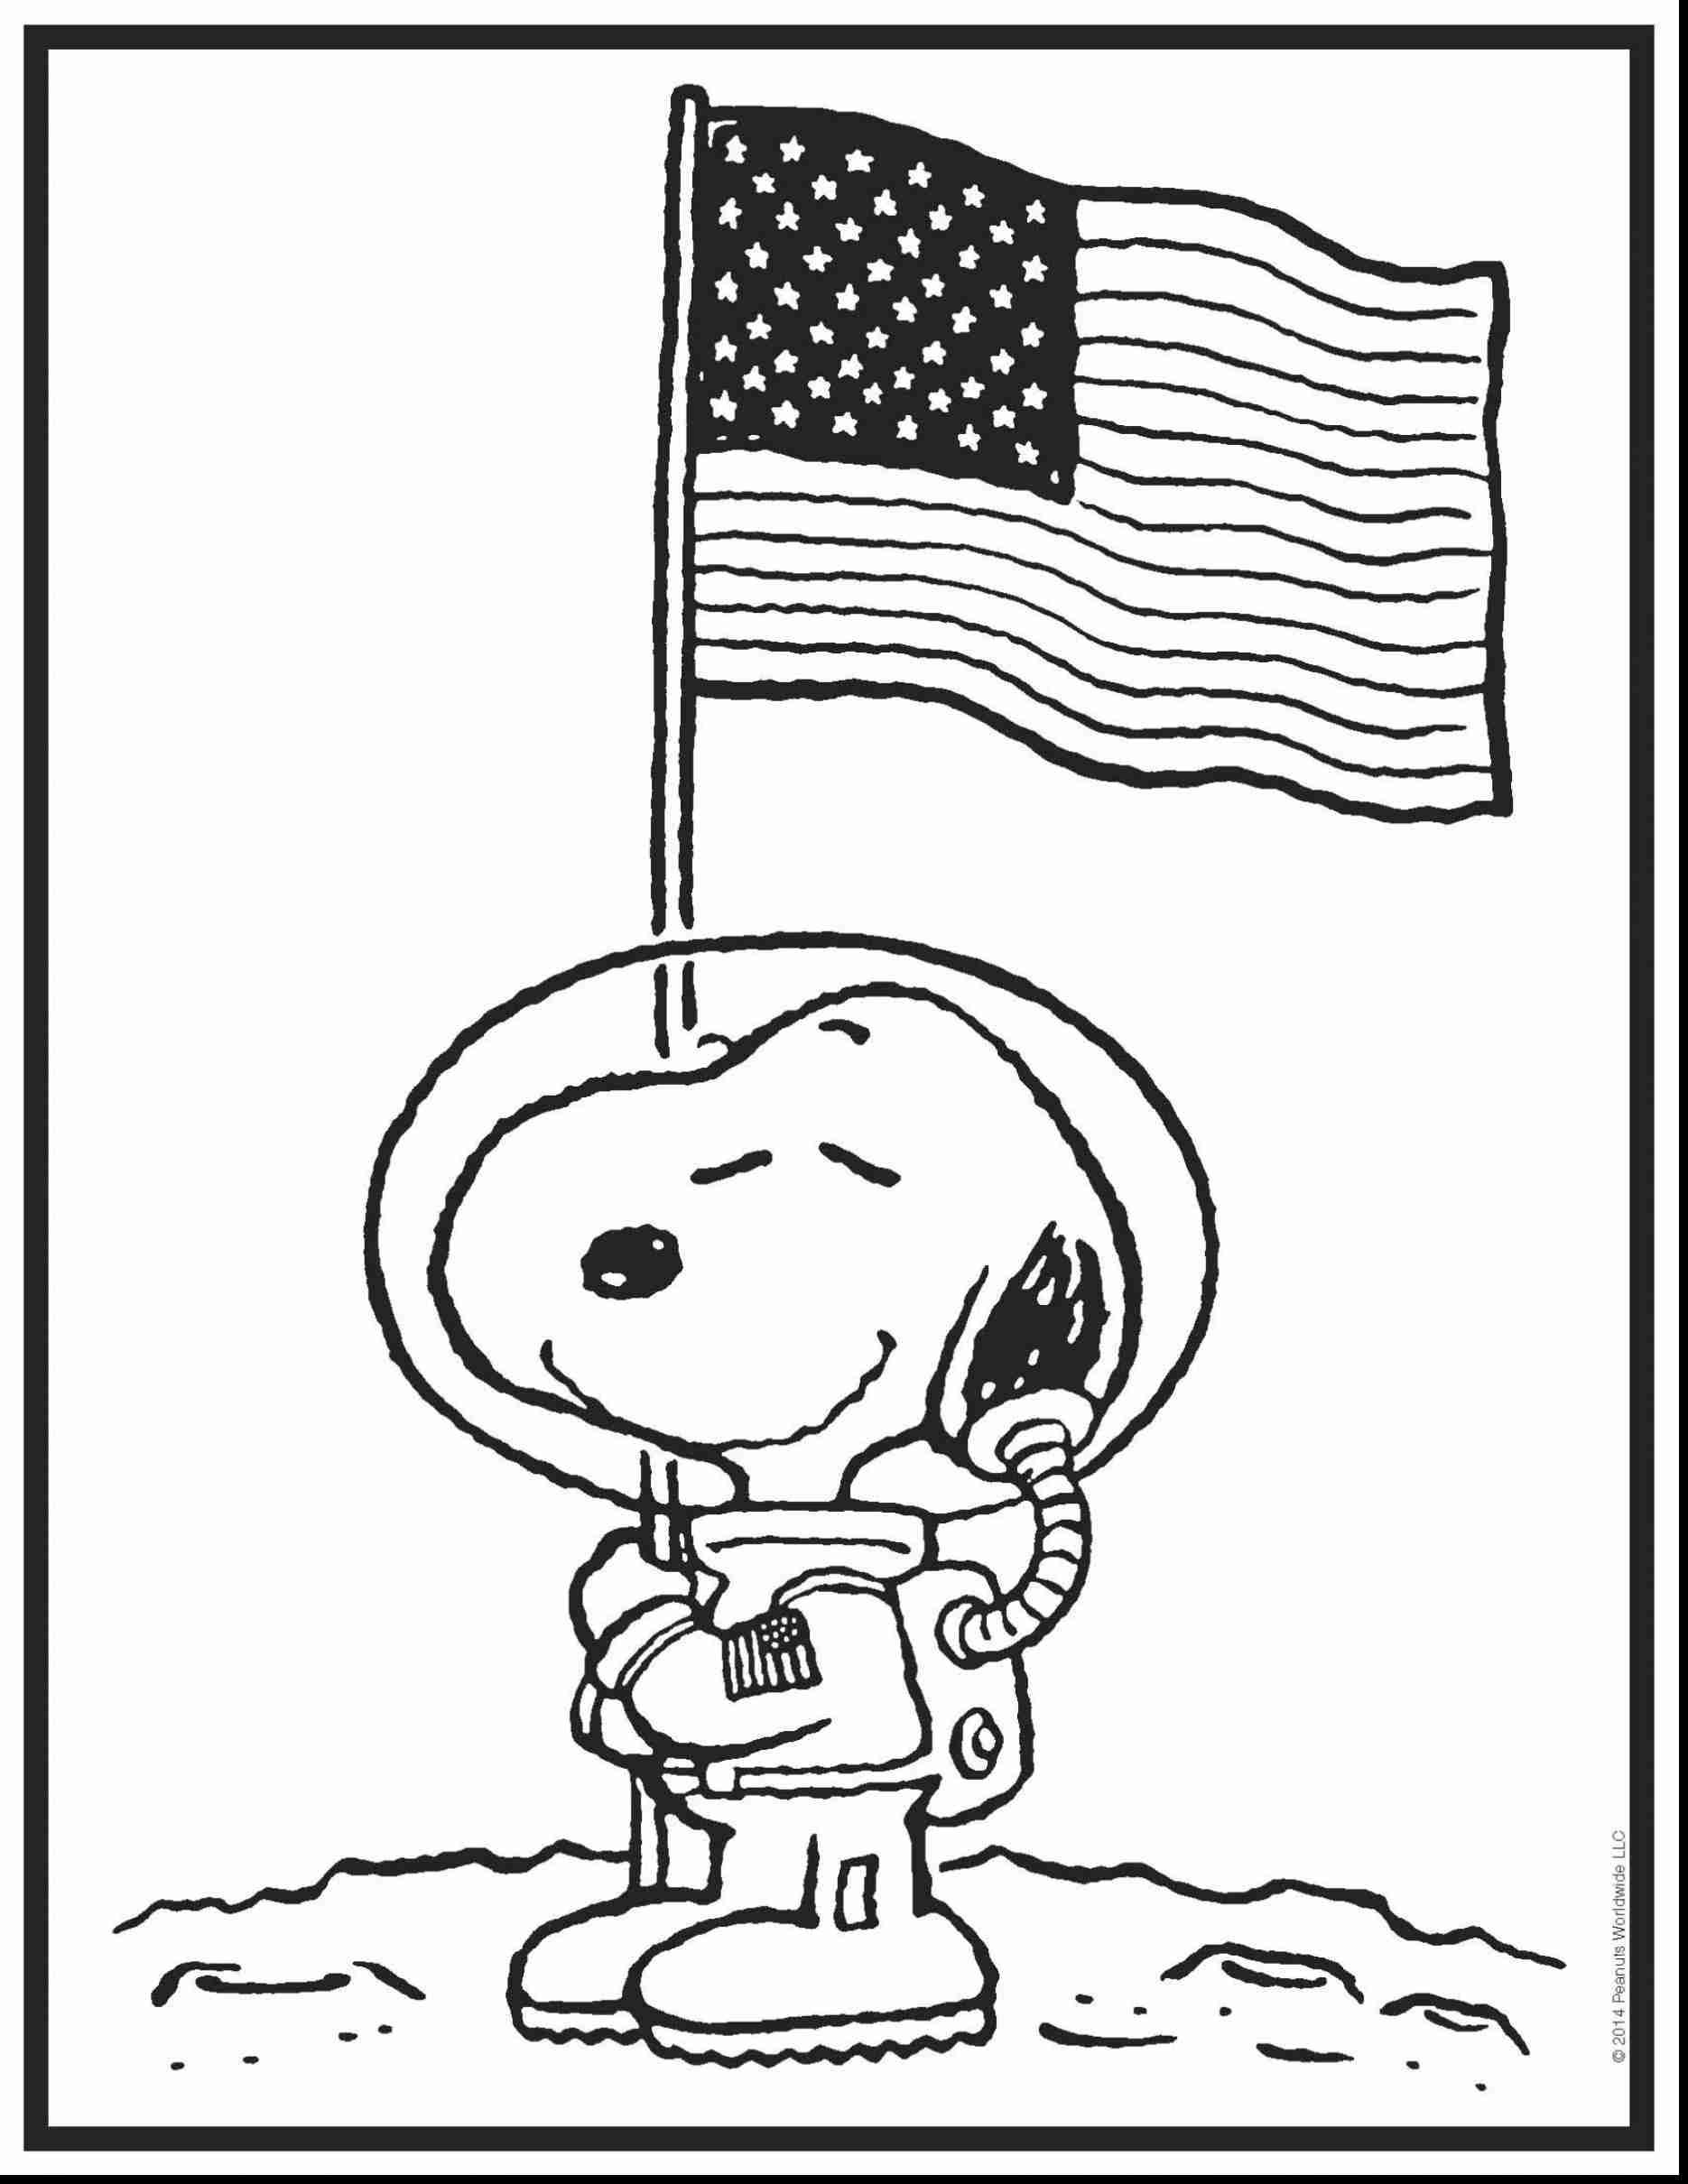 Snoopy And Woodstock Coloring Pages Coloring Ideas Snoopy Coloring Pages Tingameday Com Ideas And